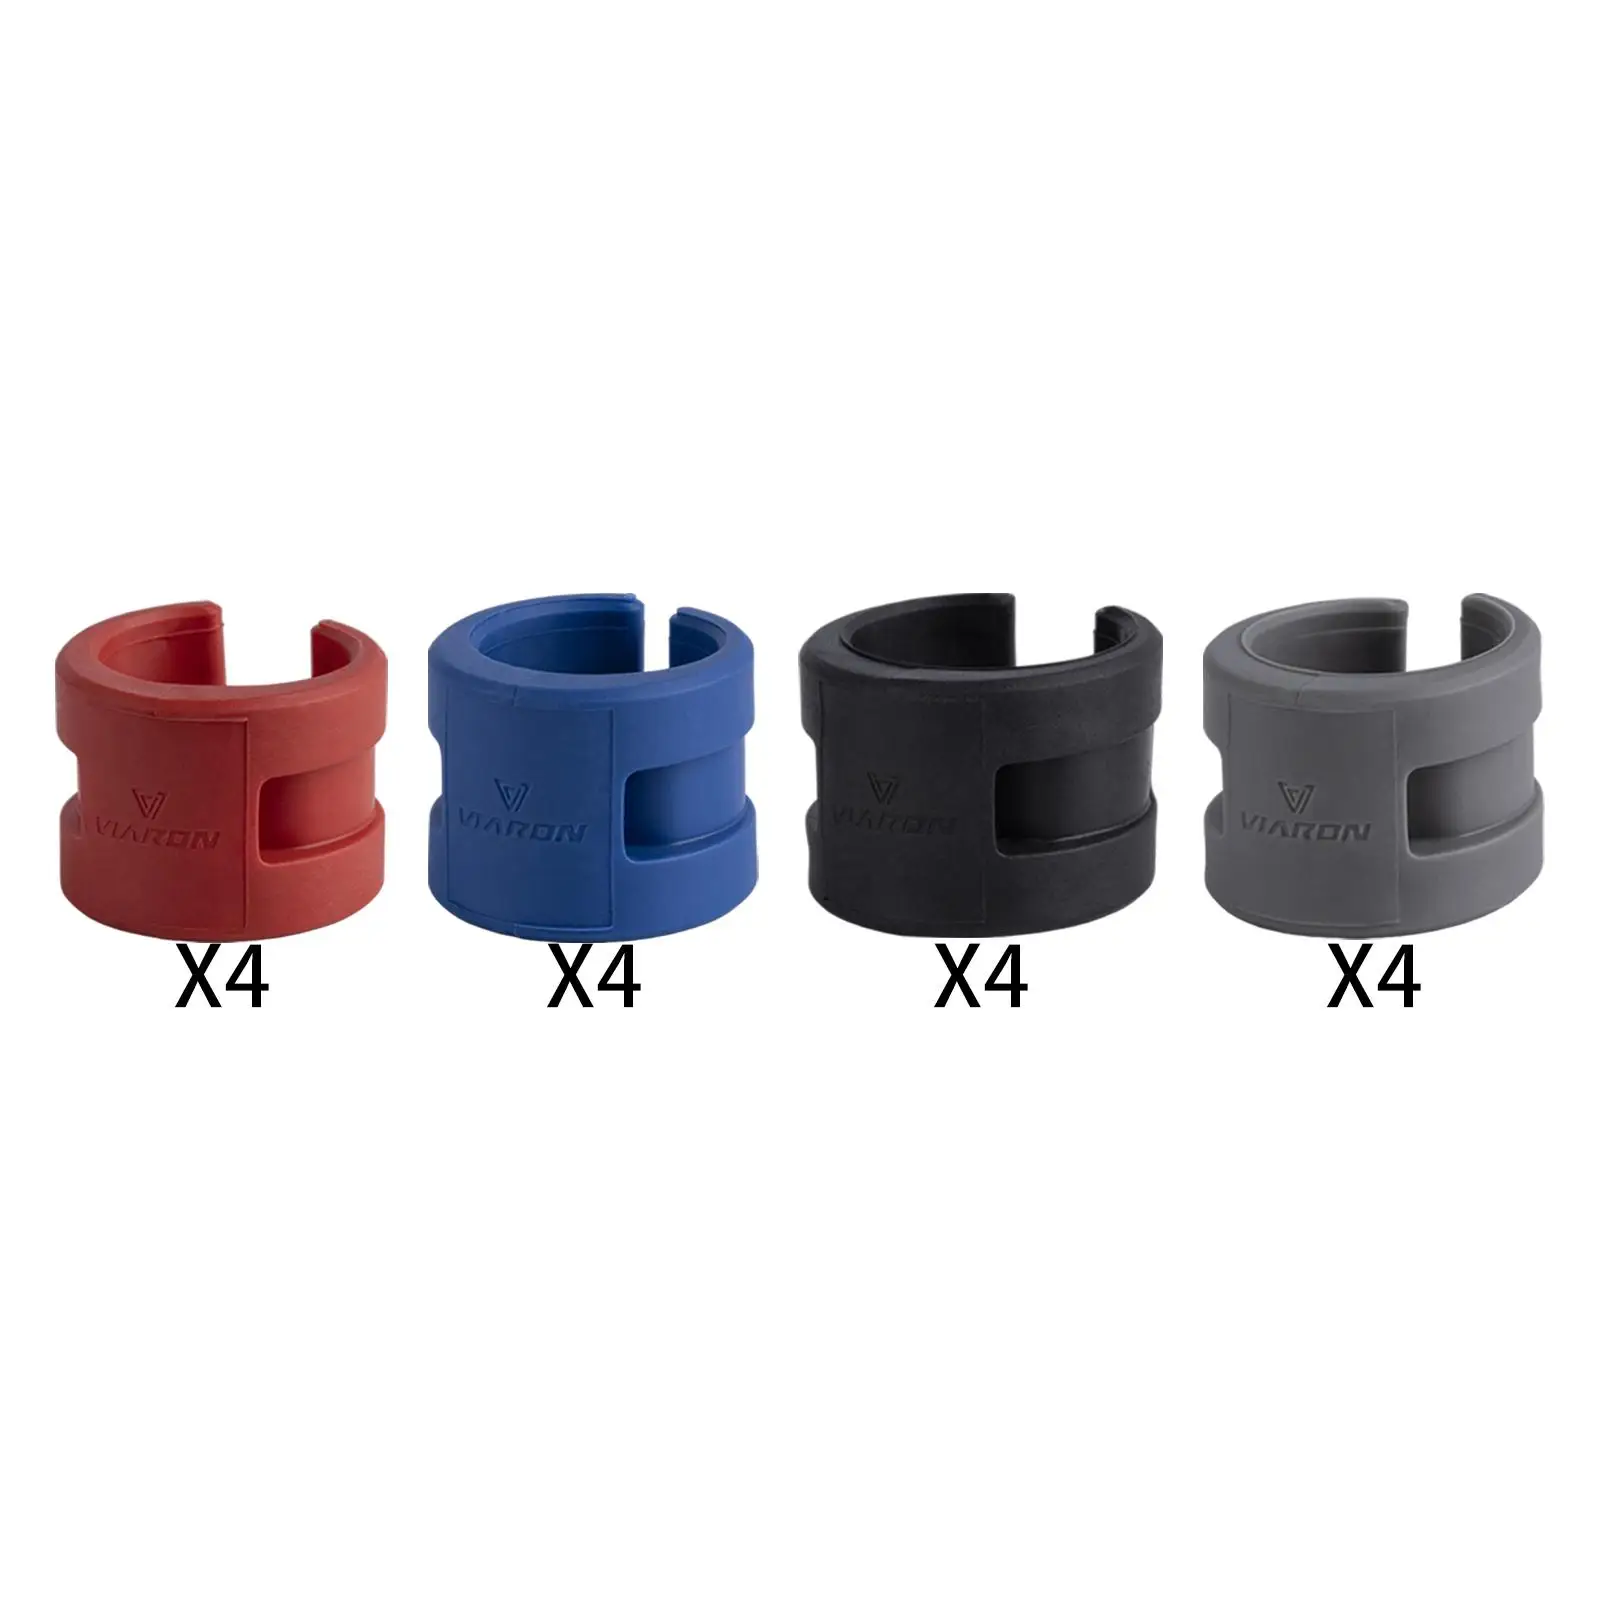 4Pcs Bike Chainstay   Stickers  Protective  Chain  Parts for Mountain Bike Cycling Road Bike BMX